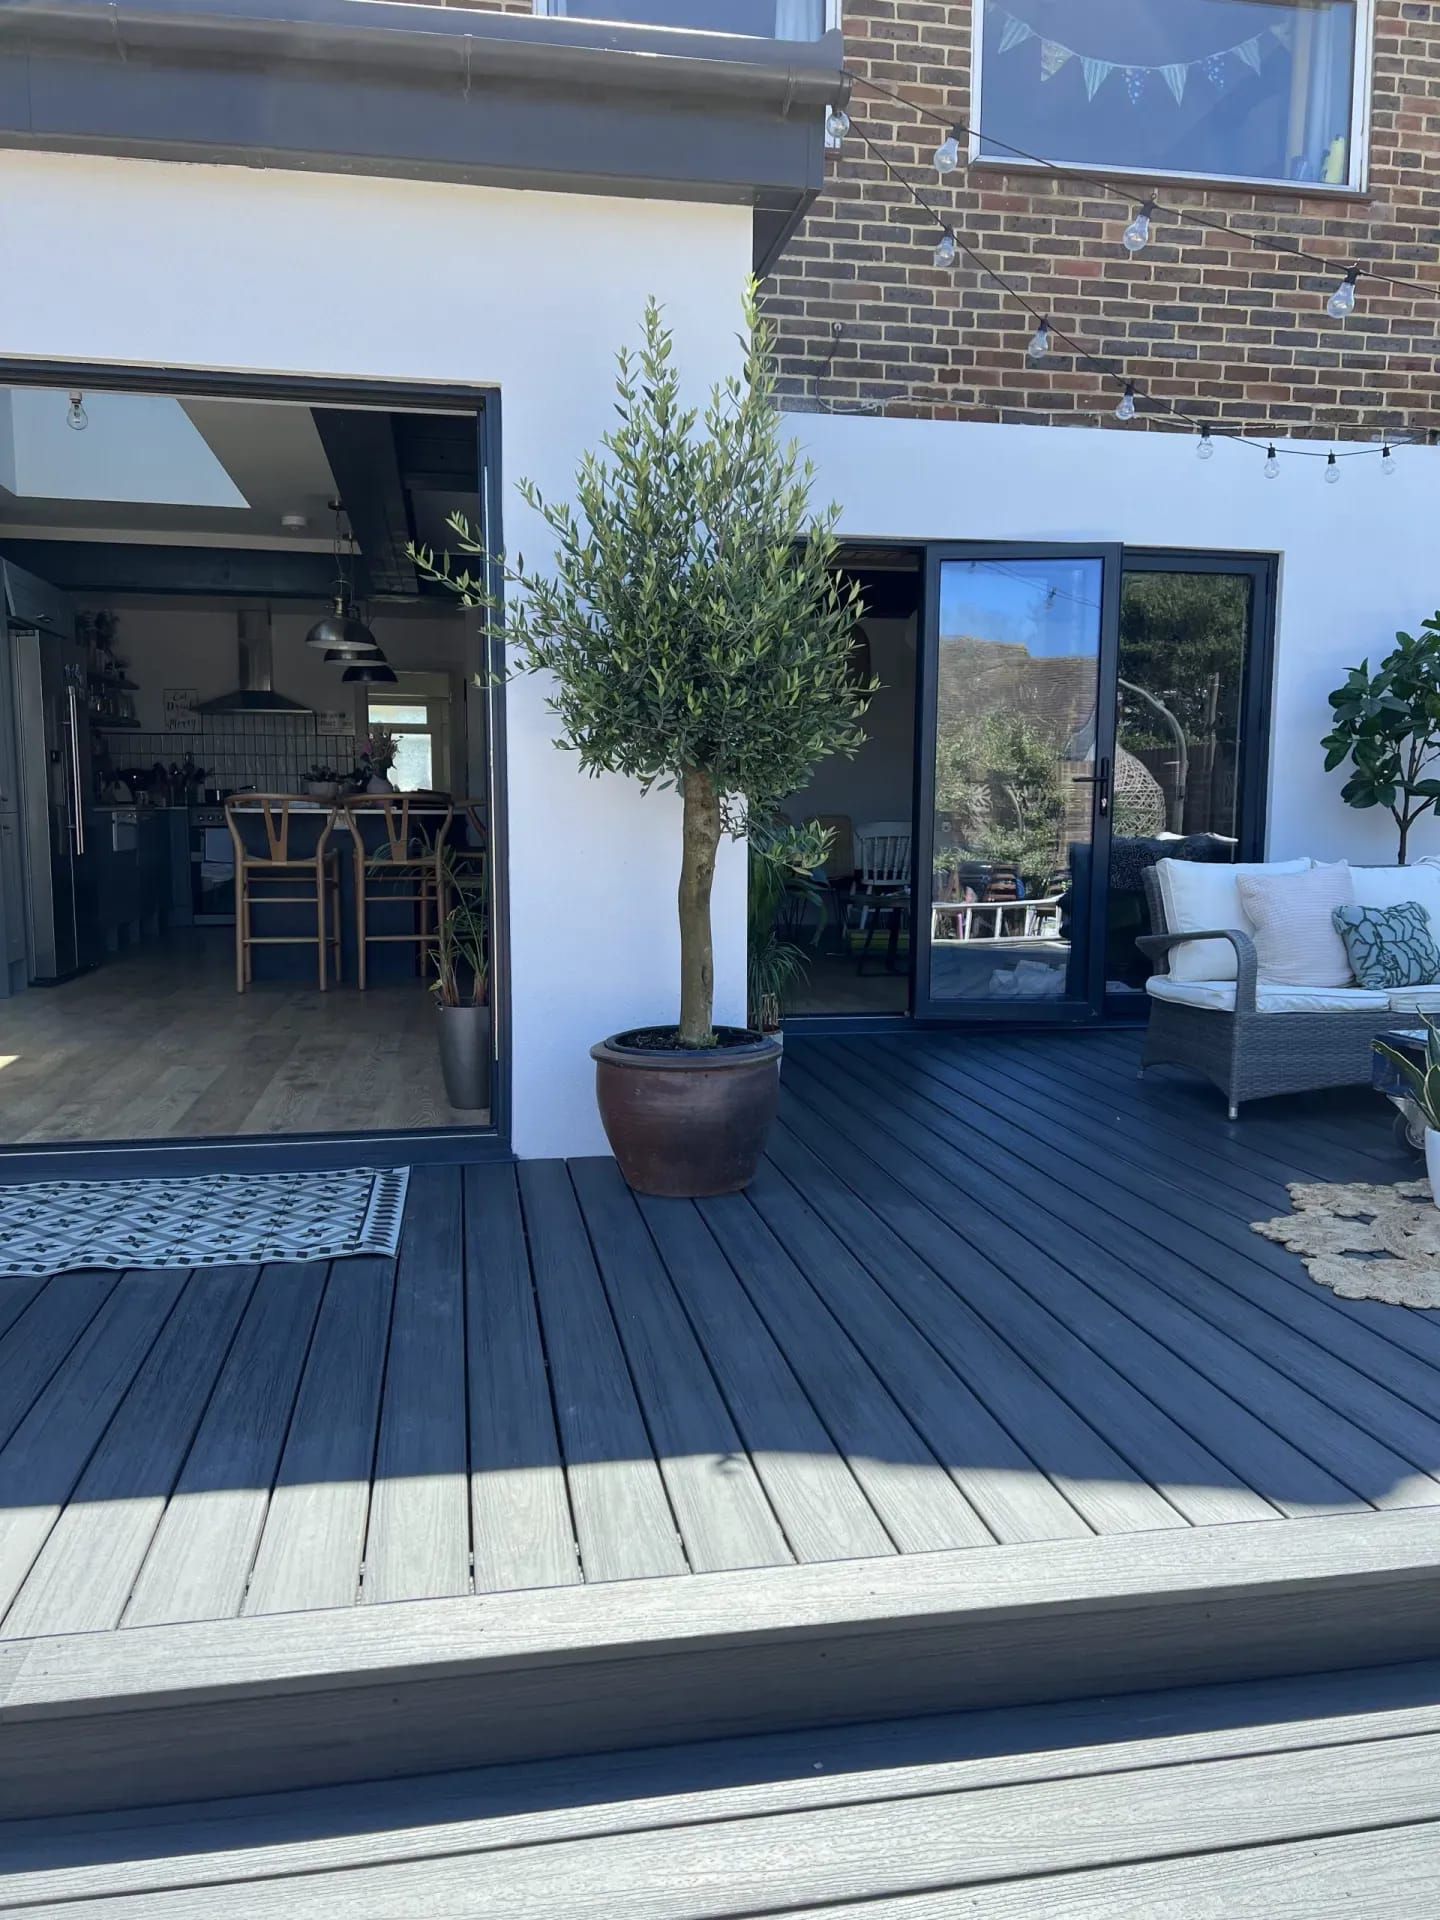 The Ultimate Guide to Composite Decking:
Benefits and Maintenance Tips